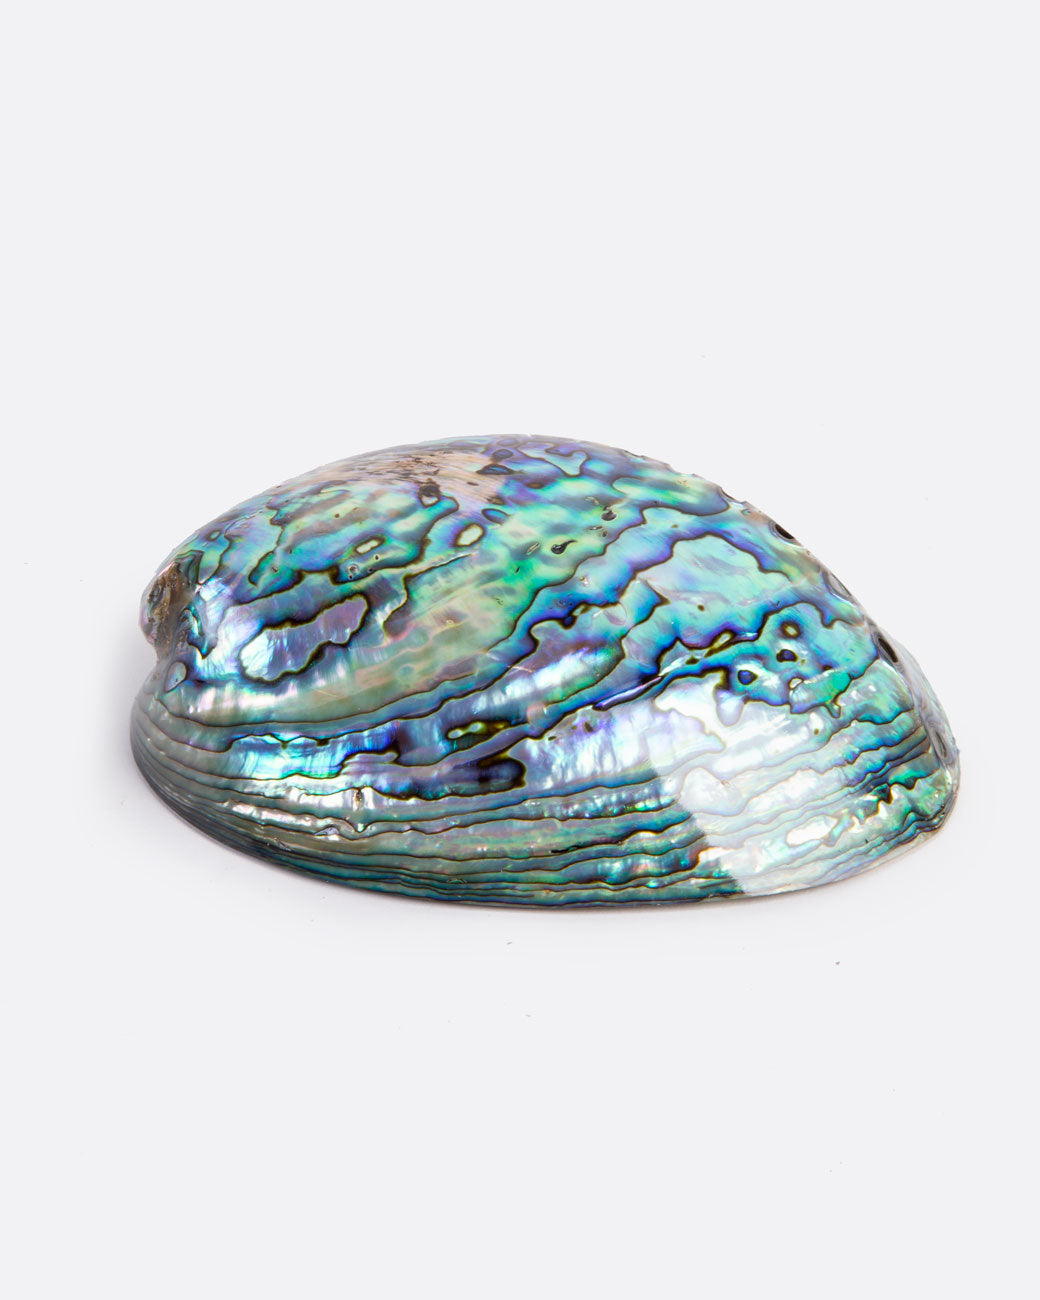 a colorful abalone shell with a glossy finish sits on a white surface.